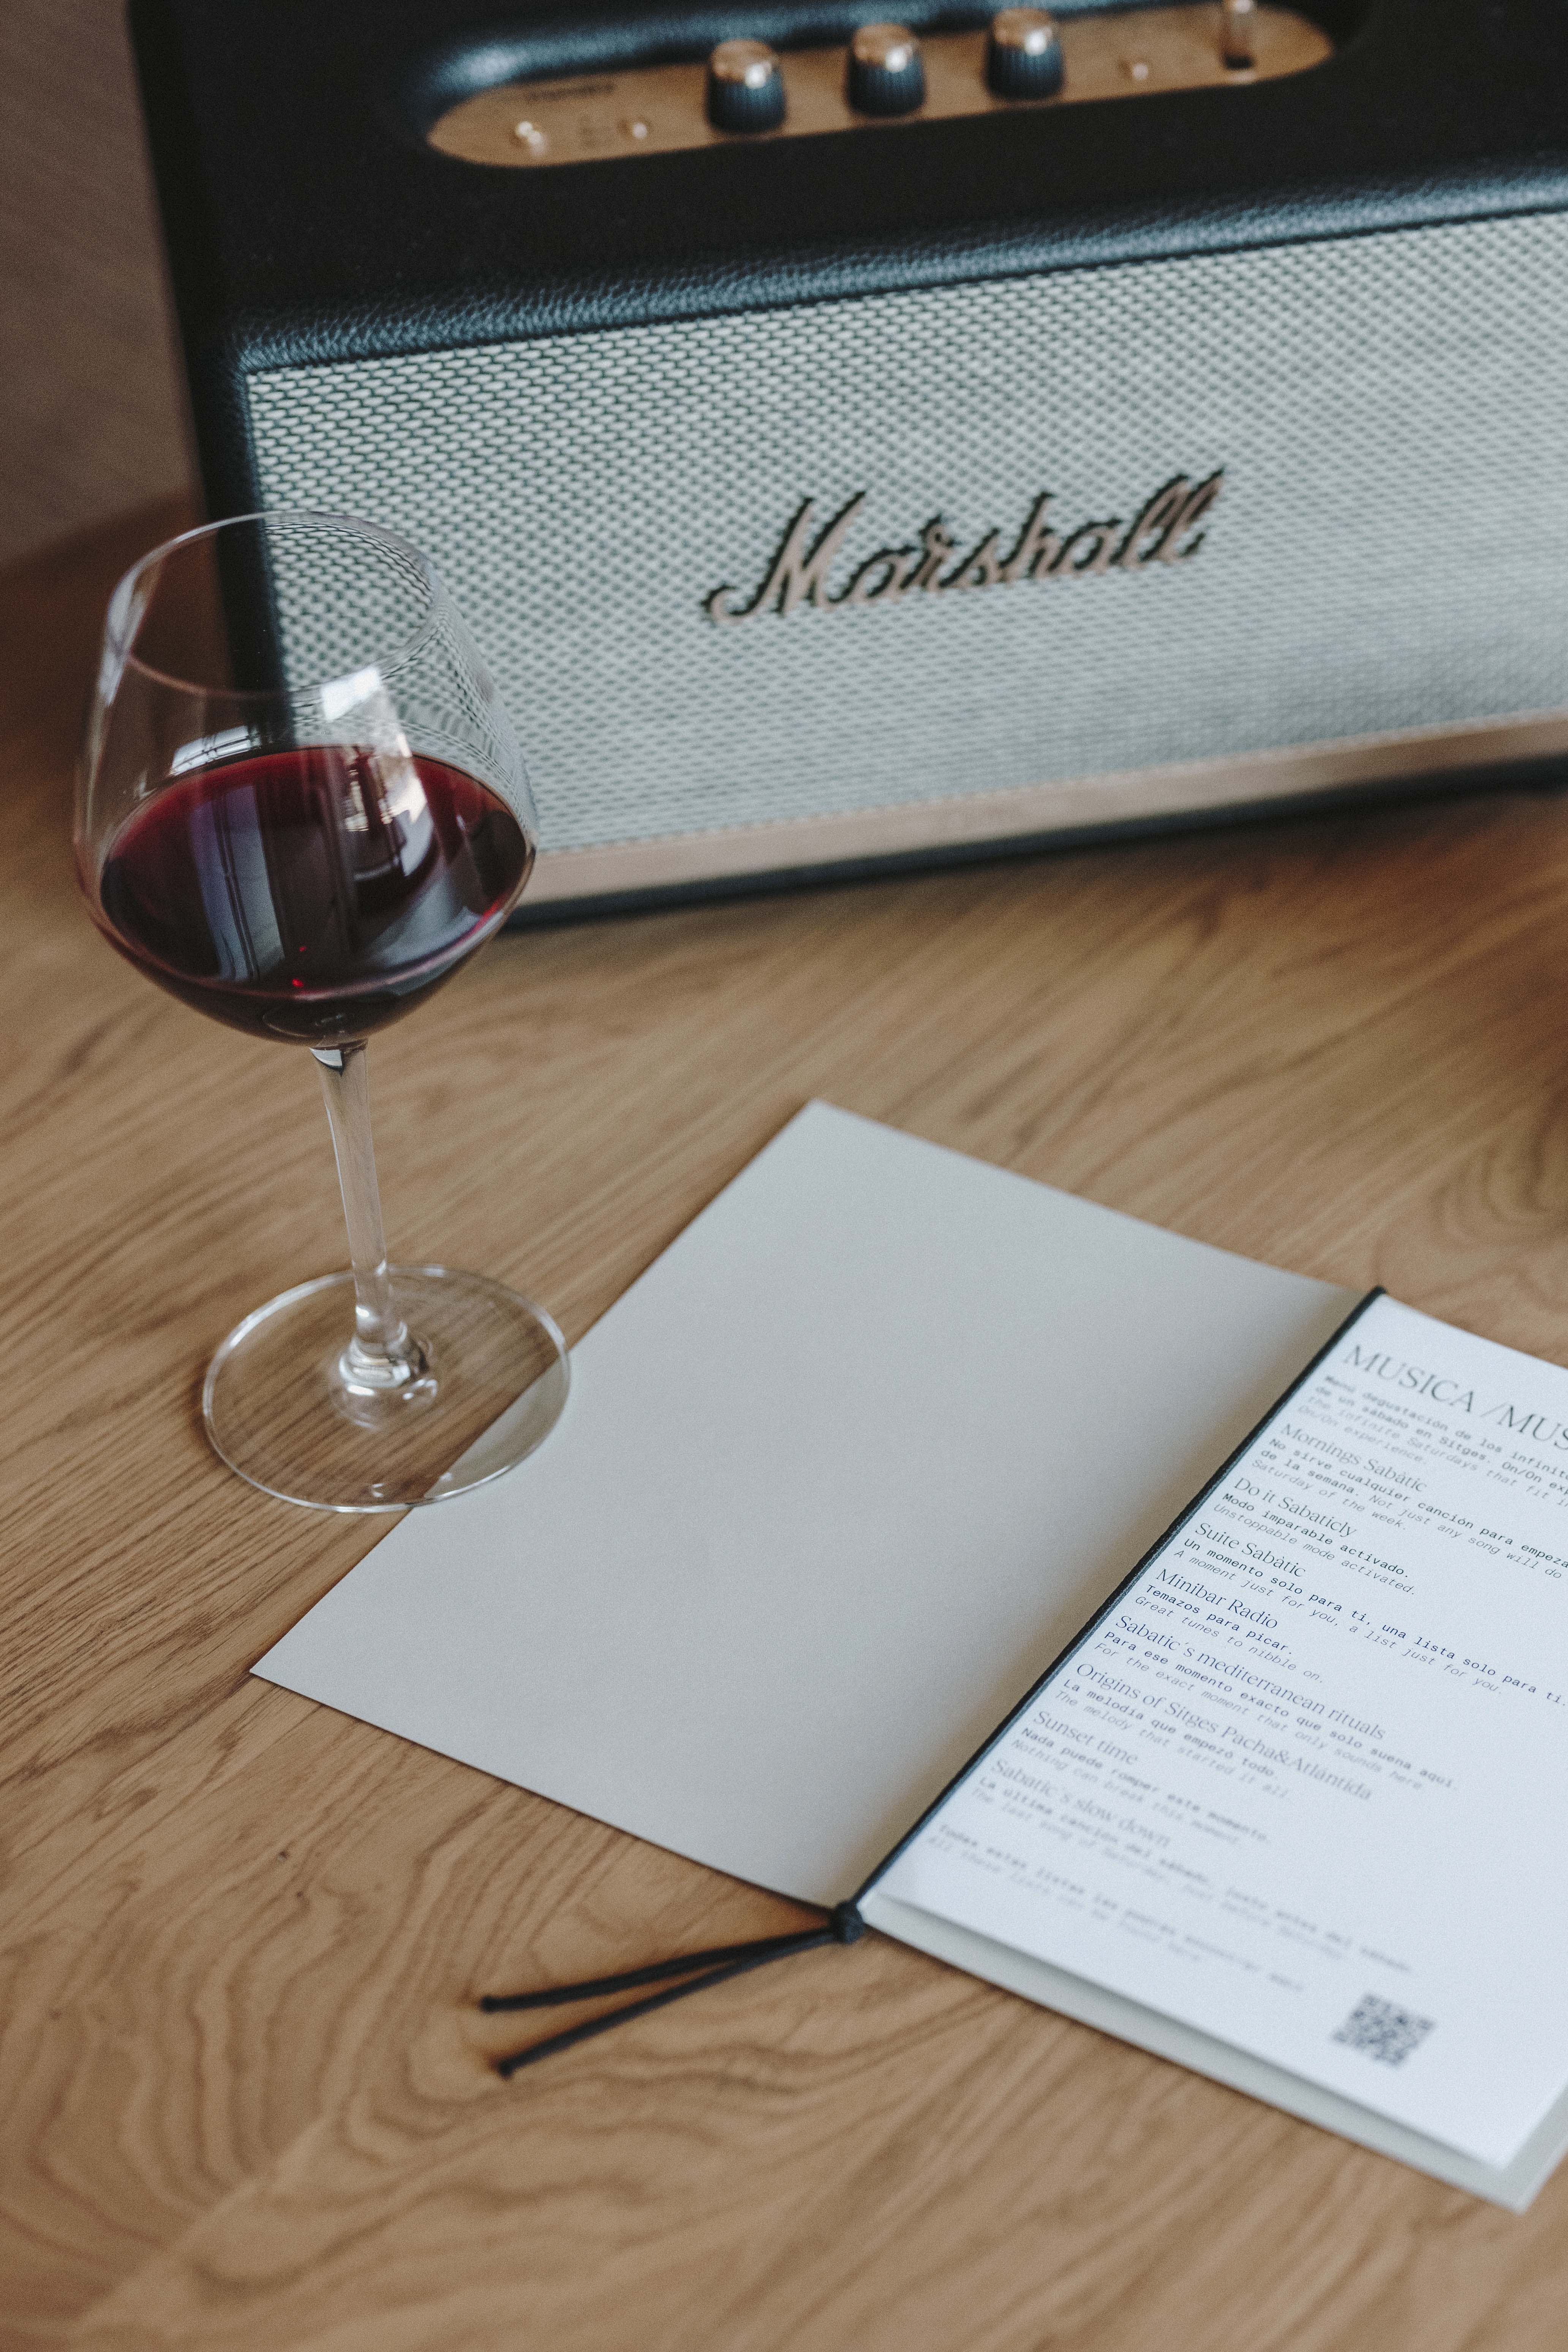 A Marshall speaker and music menu with curated playlists keep the good times rolling